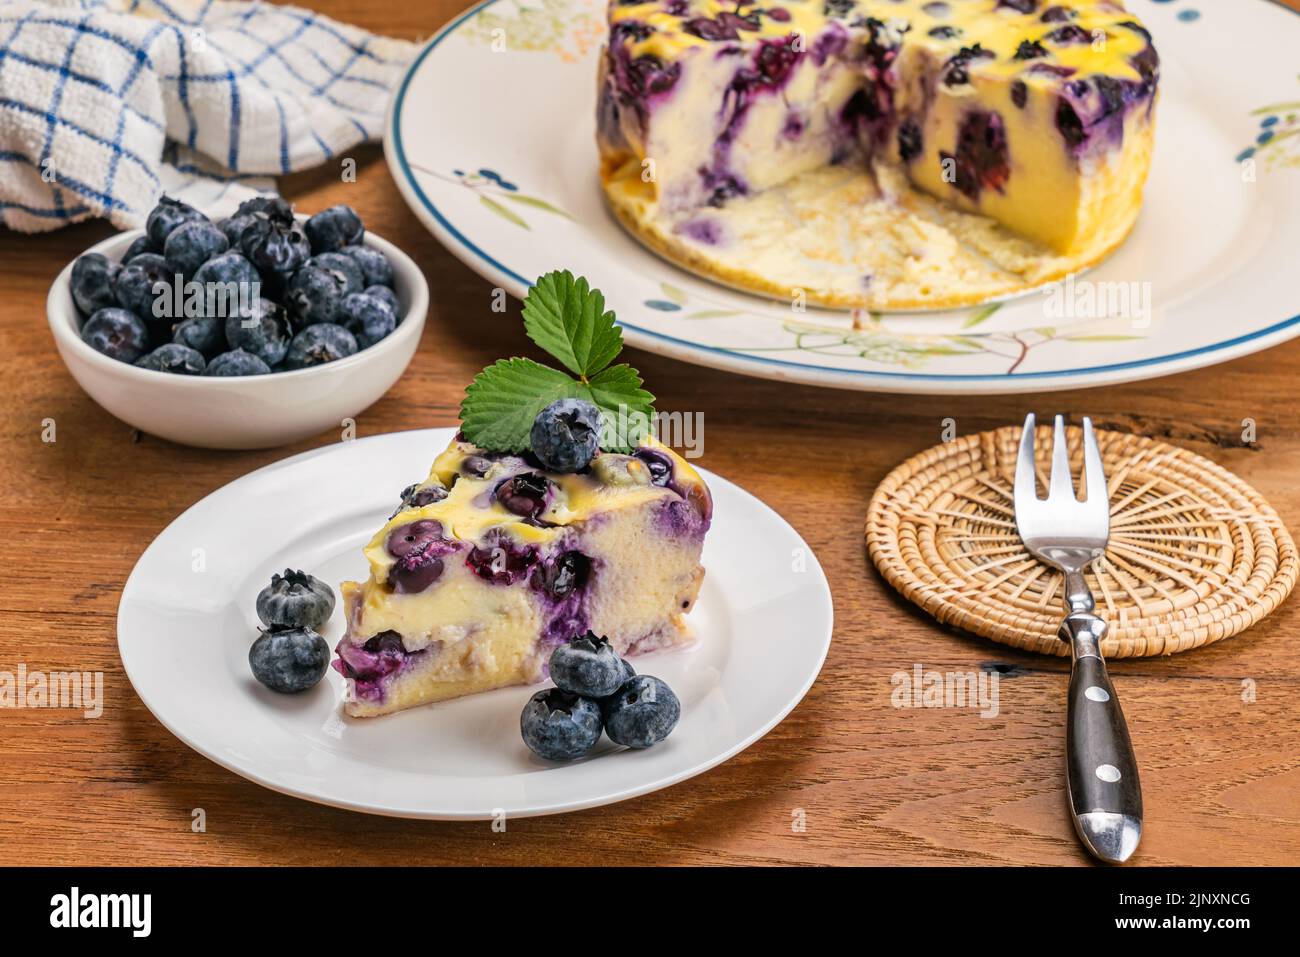 Blueberry yoghurt cake in white ceramic dish. Portion blueberry yogurt cake with blueberries in ceramic cup, metal fork on bamboo mat on wooden table. Stock Photo